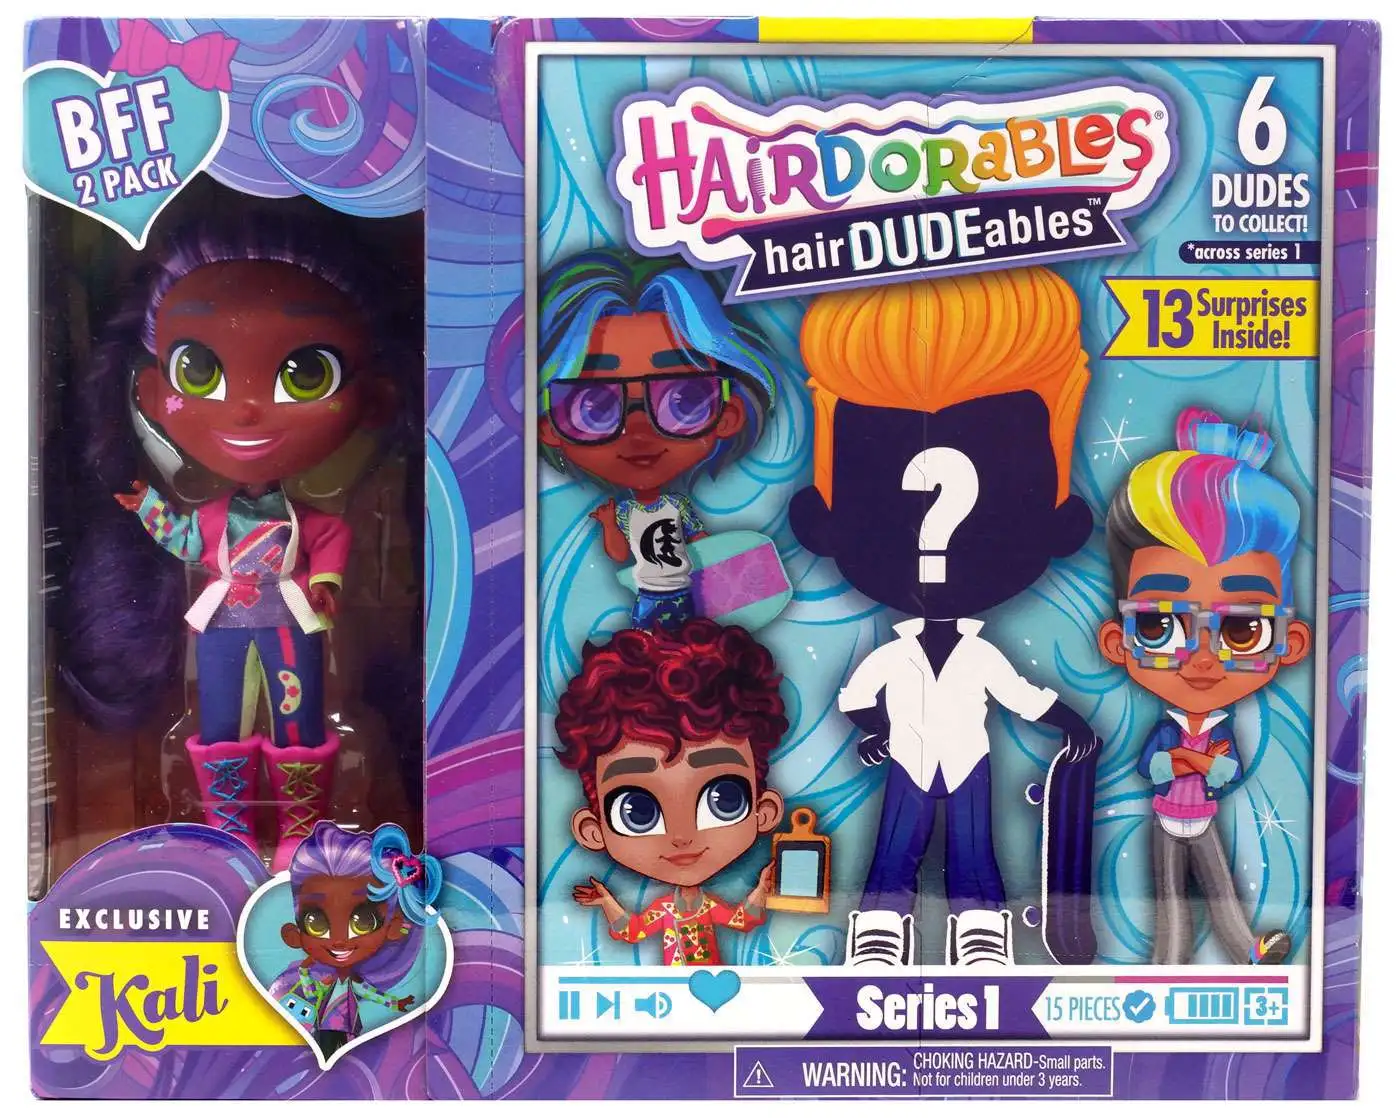 Hairdorables Hair-DUDE-ables Surprise Pack with Exclusive Doll Series 2 